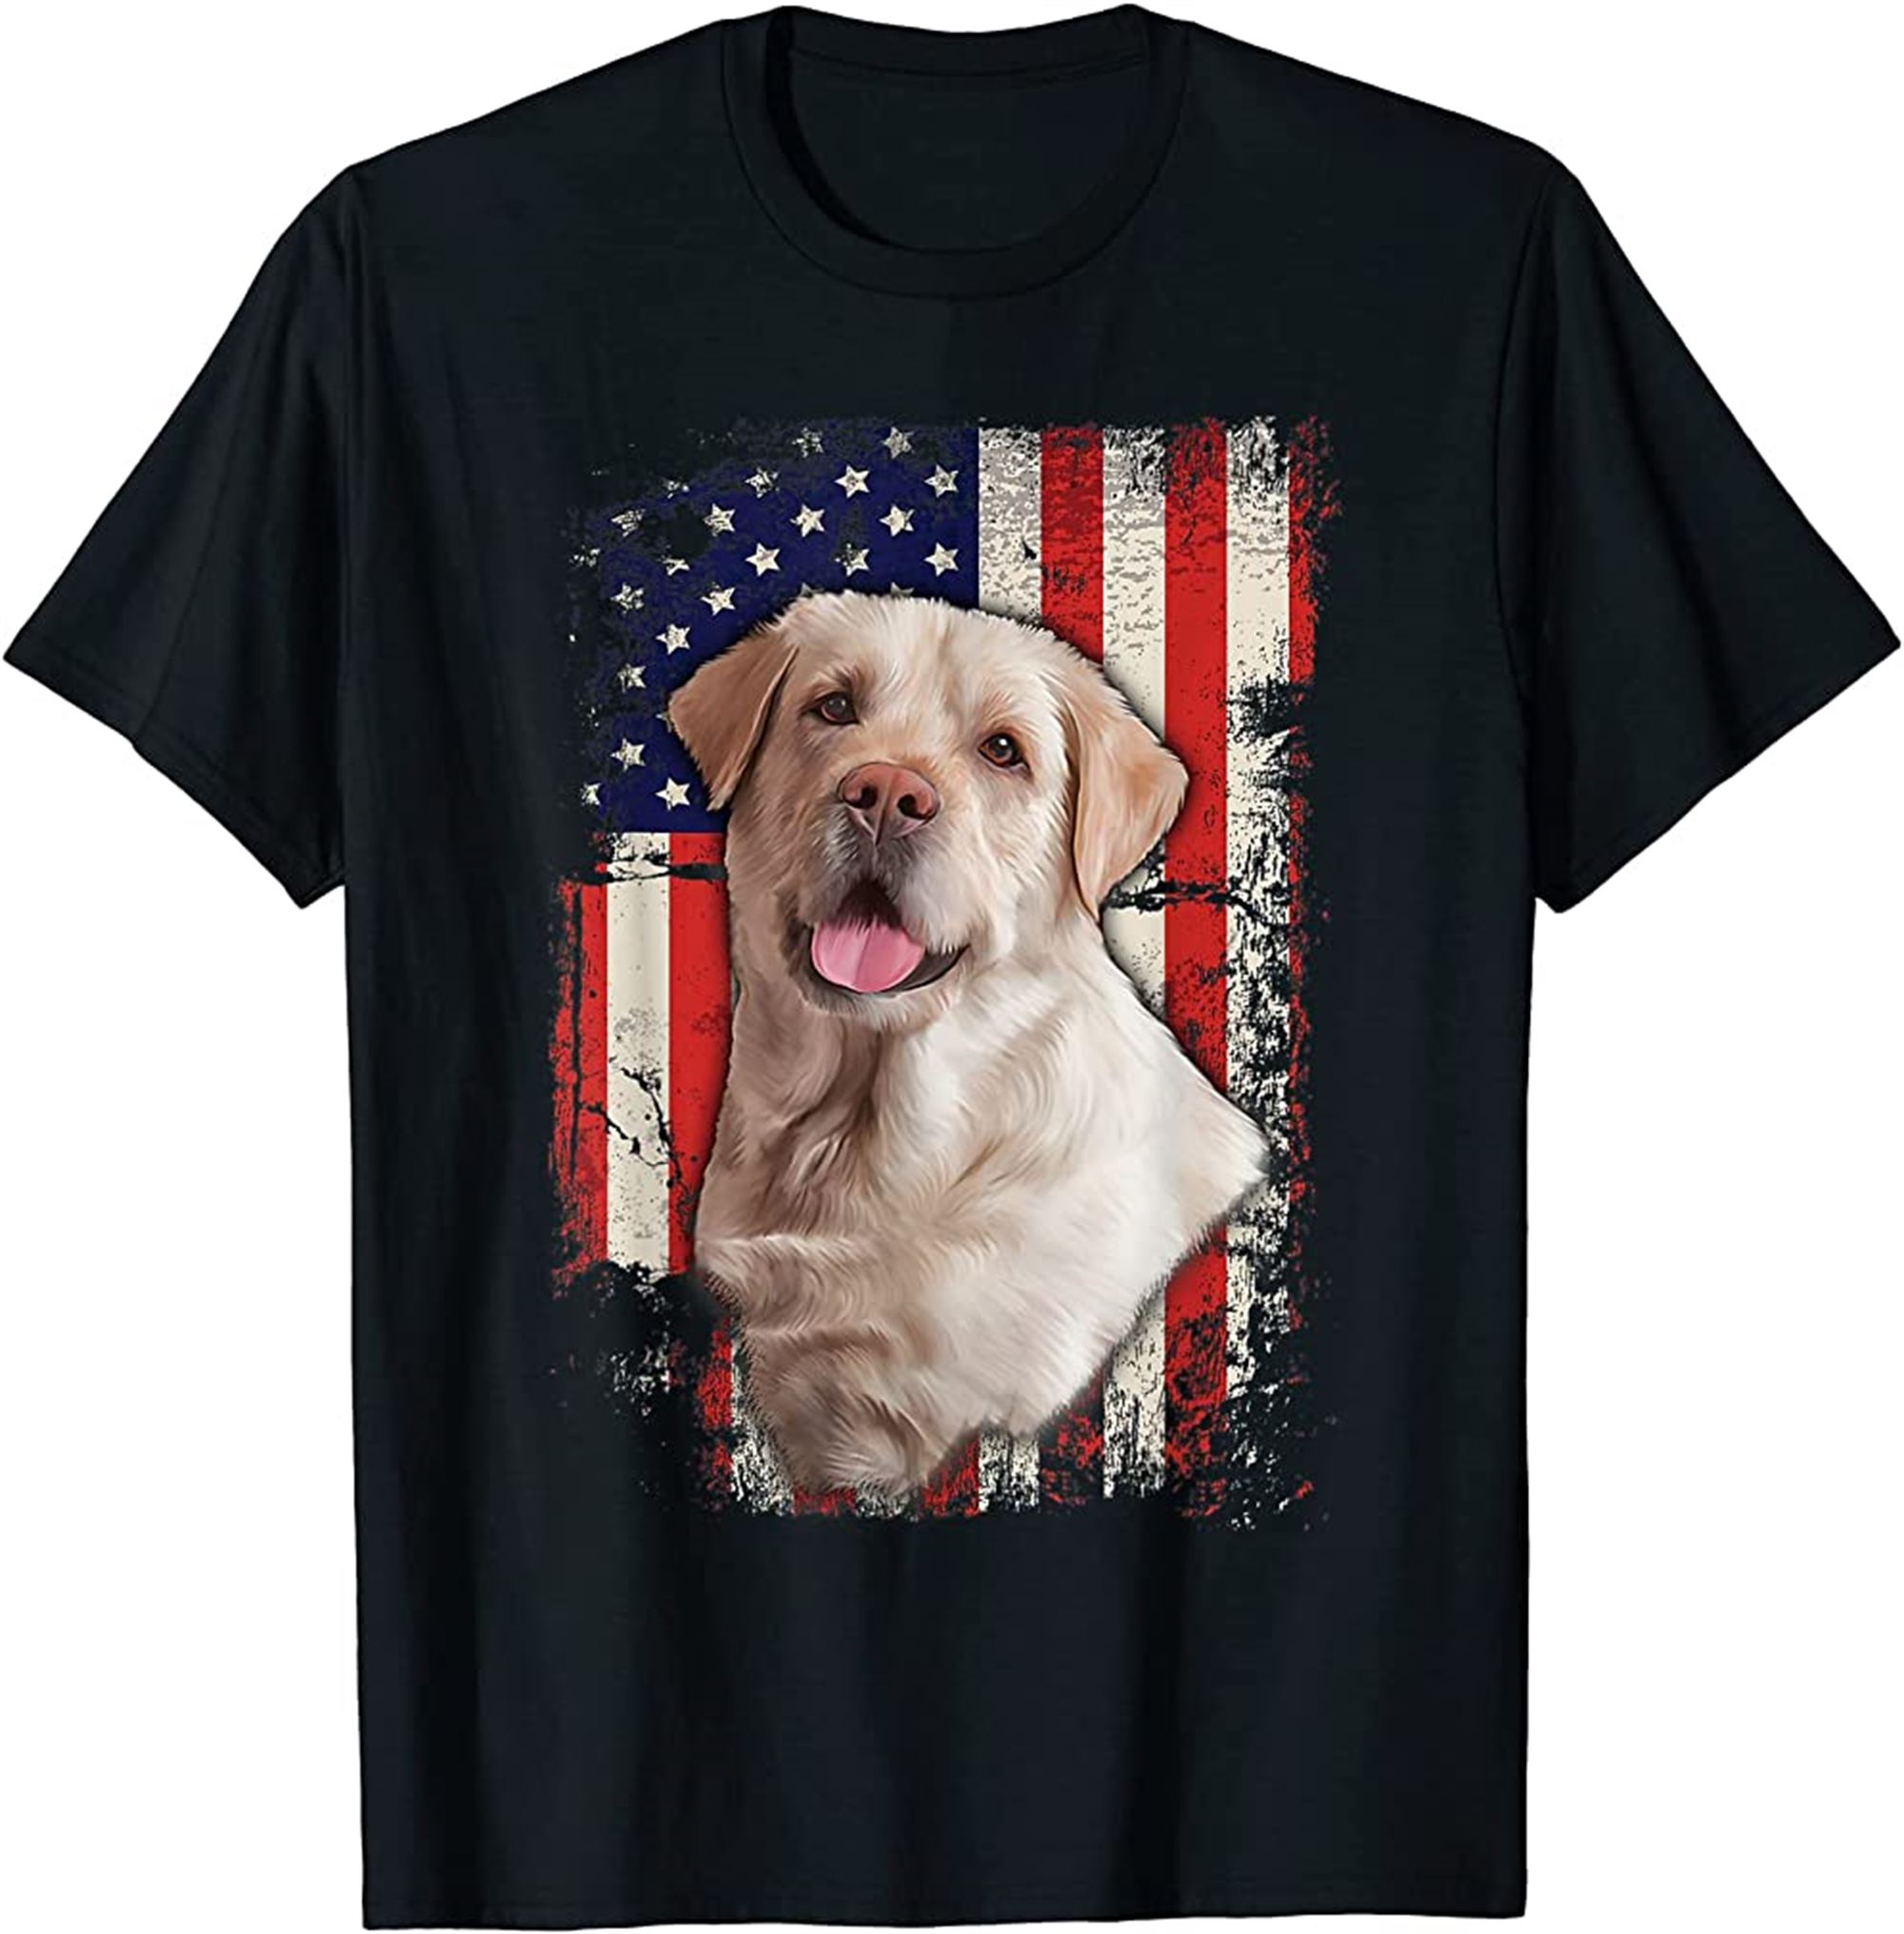 Yellow Labrador Labs Patriotic American Flag Dog 4th Of July T-shirt Size Up To 5xl